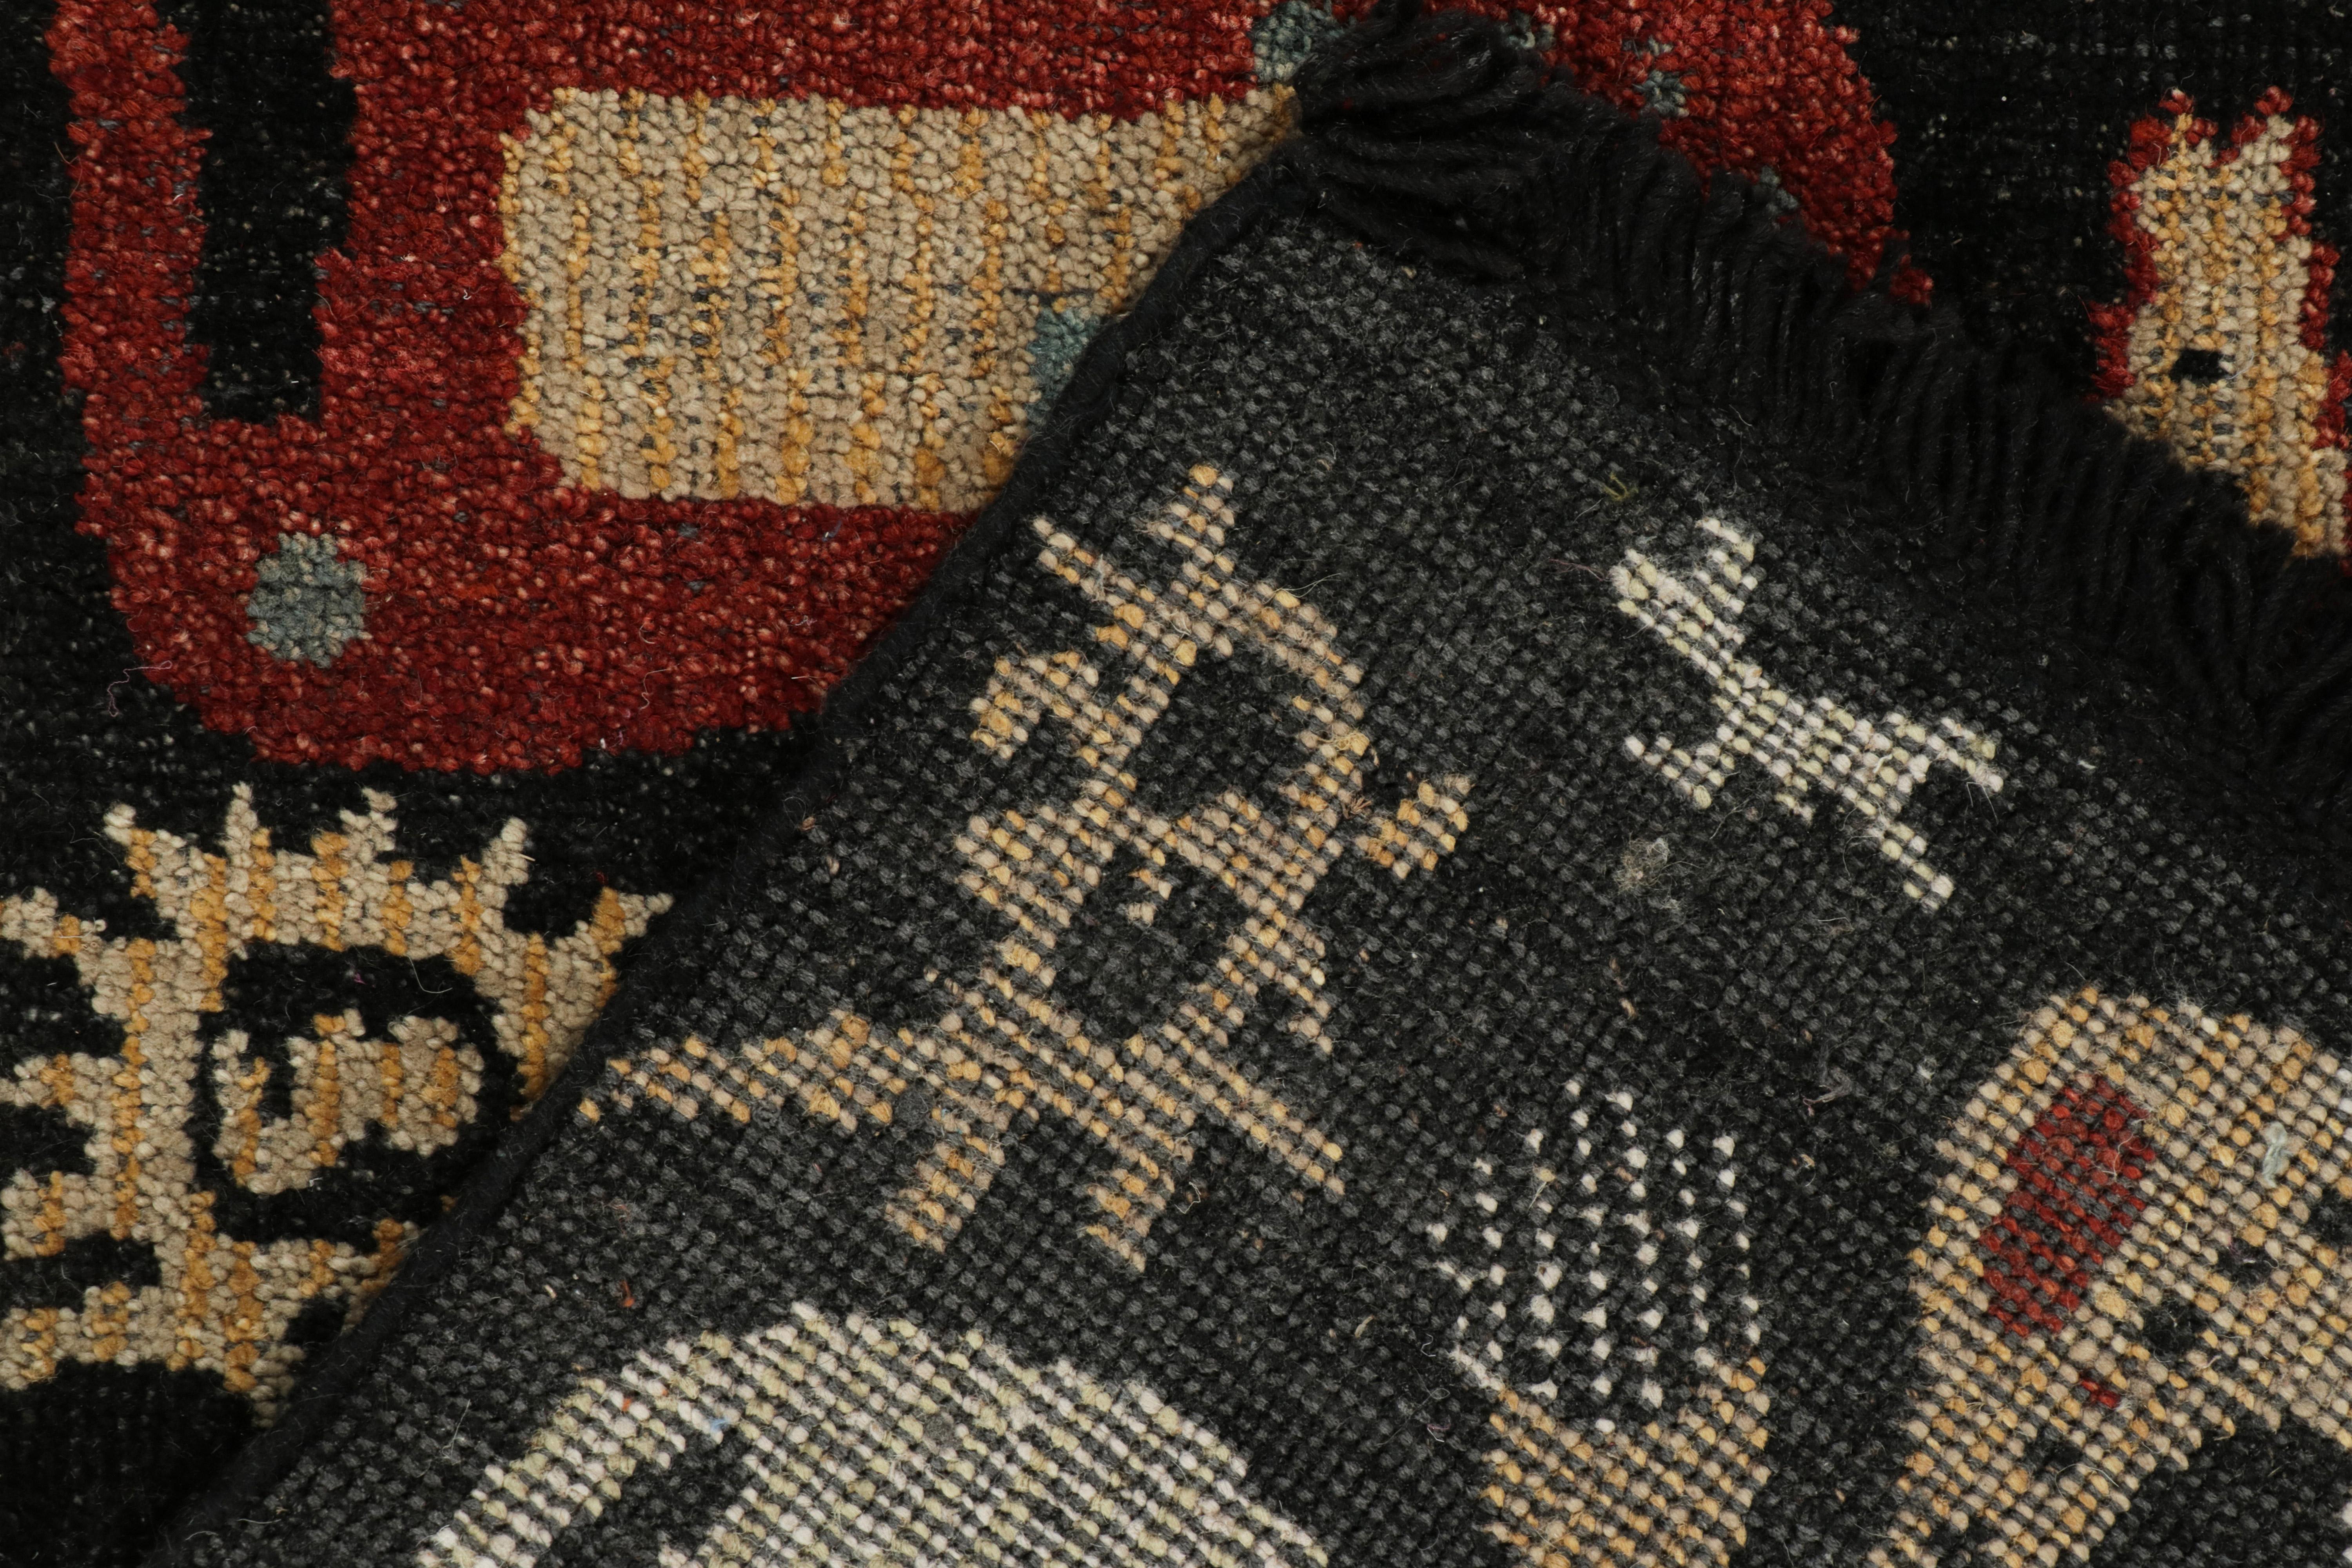 Contemporary Rug & Kilim's Tribal Style Rug in Black, Red and White Pictorial Pattern For Sale